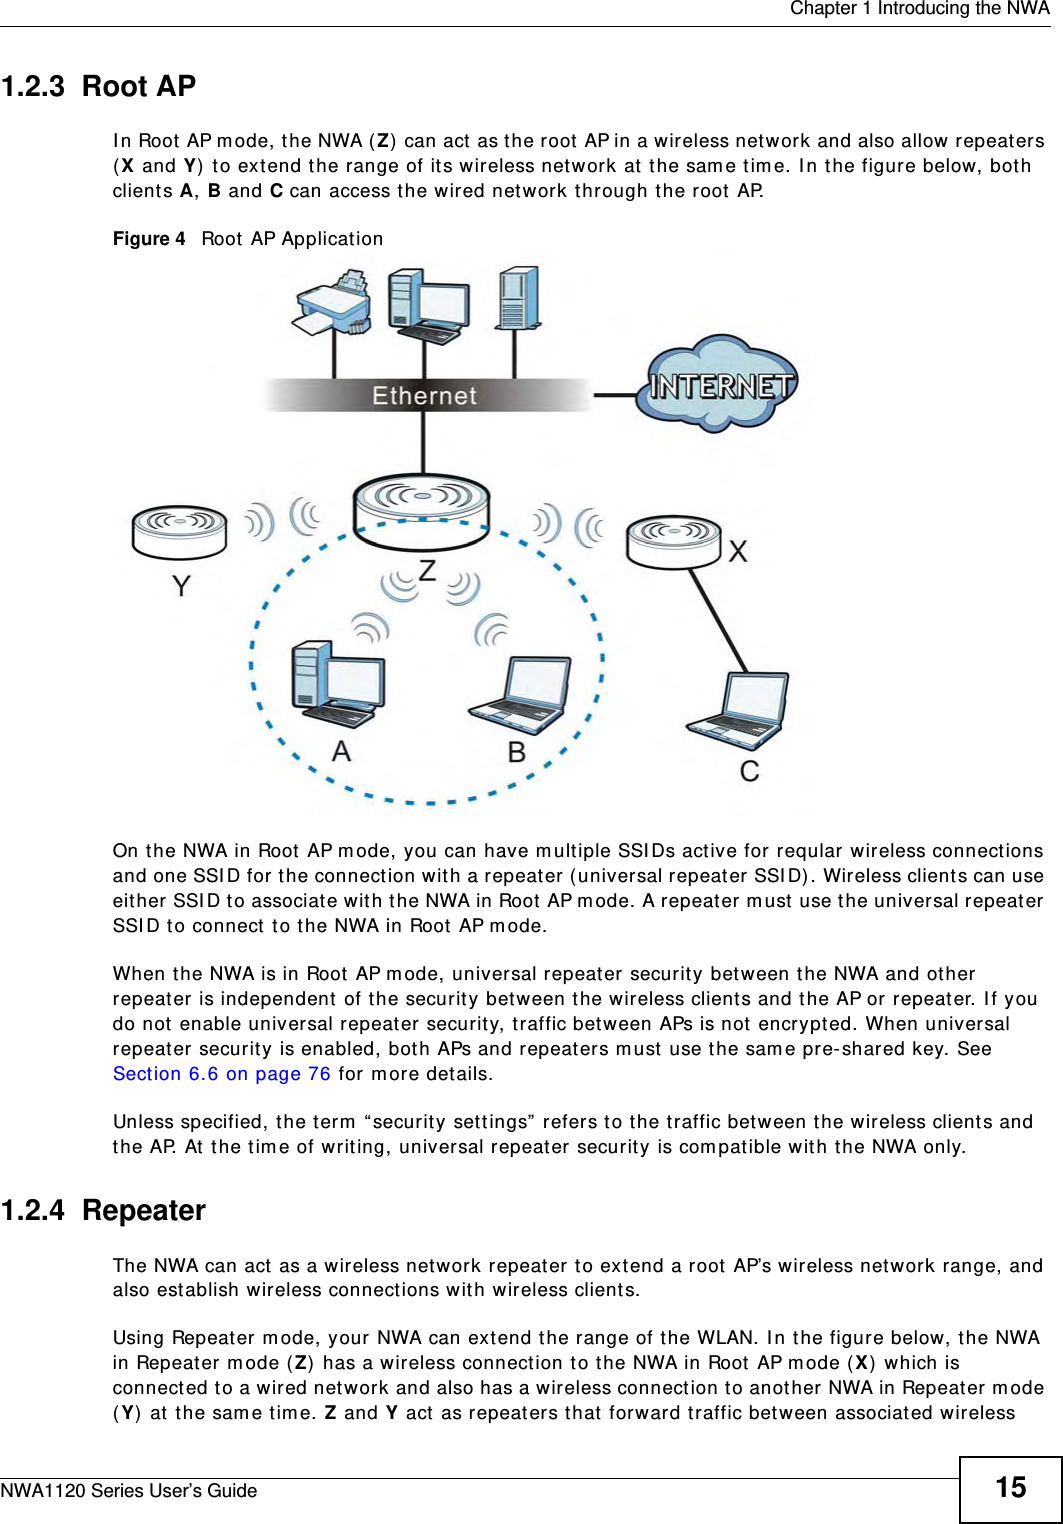  Chapter 1 Introducing the NWANWA1120 Series User’s Guide 151.2.3  Root APIn Root AP mode, the NWA (Z) can act as the root AP in a wireless network and also allow repeaters (X and Y) to extend the range of its wireless network at the same time. In the figure below, both clients A, B and C can access the wired network through the root AP.Figure 4   Root AP Application On the NWA in Root AP mode, you can have multiple SSIDs active for reqular wireless connections and one SSID for the connection with a repeater (universal repeater SSID). Wireless clients can use either SSID to associate with the NWA in Root AP mode. A repeater must use the universal repeater SSID to connect to the NWA in Root AP mode.When the NWA is in Root AP mode, universal repeater security between the NWA and other repeater is independent of the security between the wireless clients and the AP or repeater. If you do not enable universal repeater security, traffic between APs is not encrypted. When universal repeater security is enabled, both APs and repeaters must use the same pre-shared key. See Section 6.6 on page 76 for more details.Unless specified, the term “security settings” refers to the traffic between the wireless clients and the AP. At the time of writing, universal repeater security is compatible with the NWA only. 1.2.4  RepeaterThe NWA can act as a wireless network repeater to extend a root AP’s wireless network range, and also establish wireless connections with wireless clients. Using Repeater mode, your NWA can extend the range of the WLAN. In the figure below, the NWA in Repeater mode (Z) has a wireless connection to the NWA in Root AP mode (X) which is connected to a wired network and also has a wireless connection to another NWA in Repeater mode (Y) at the same time. Z and Y act as repeaters that forward traffic between associated wireless 